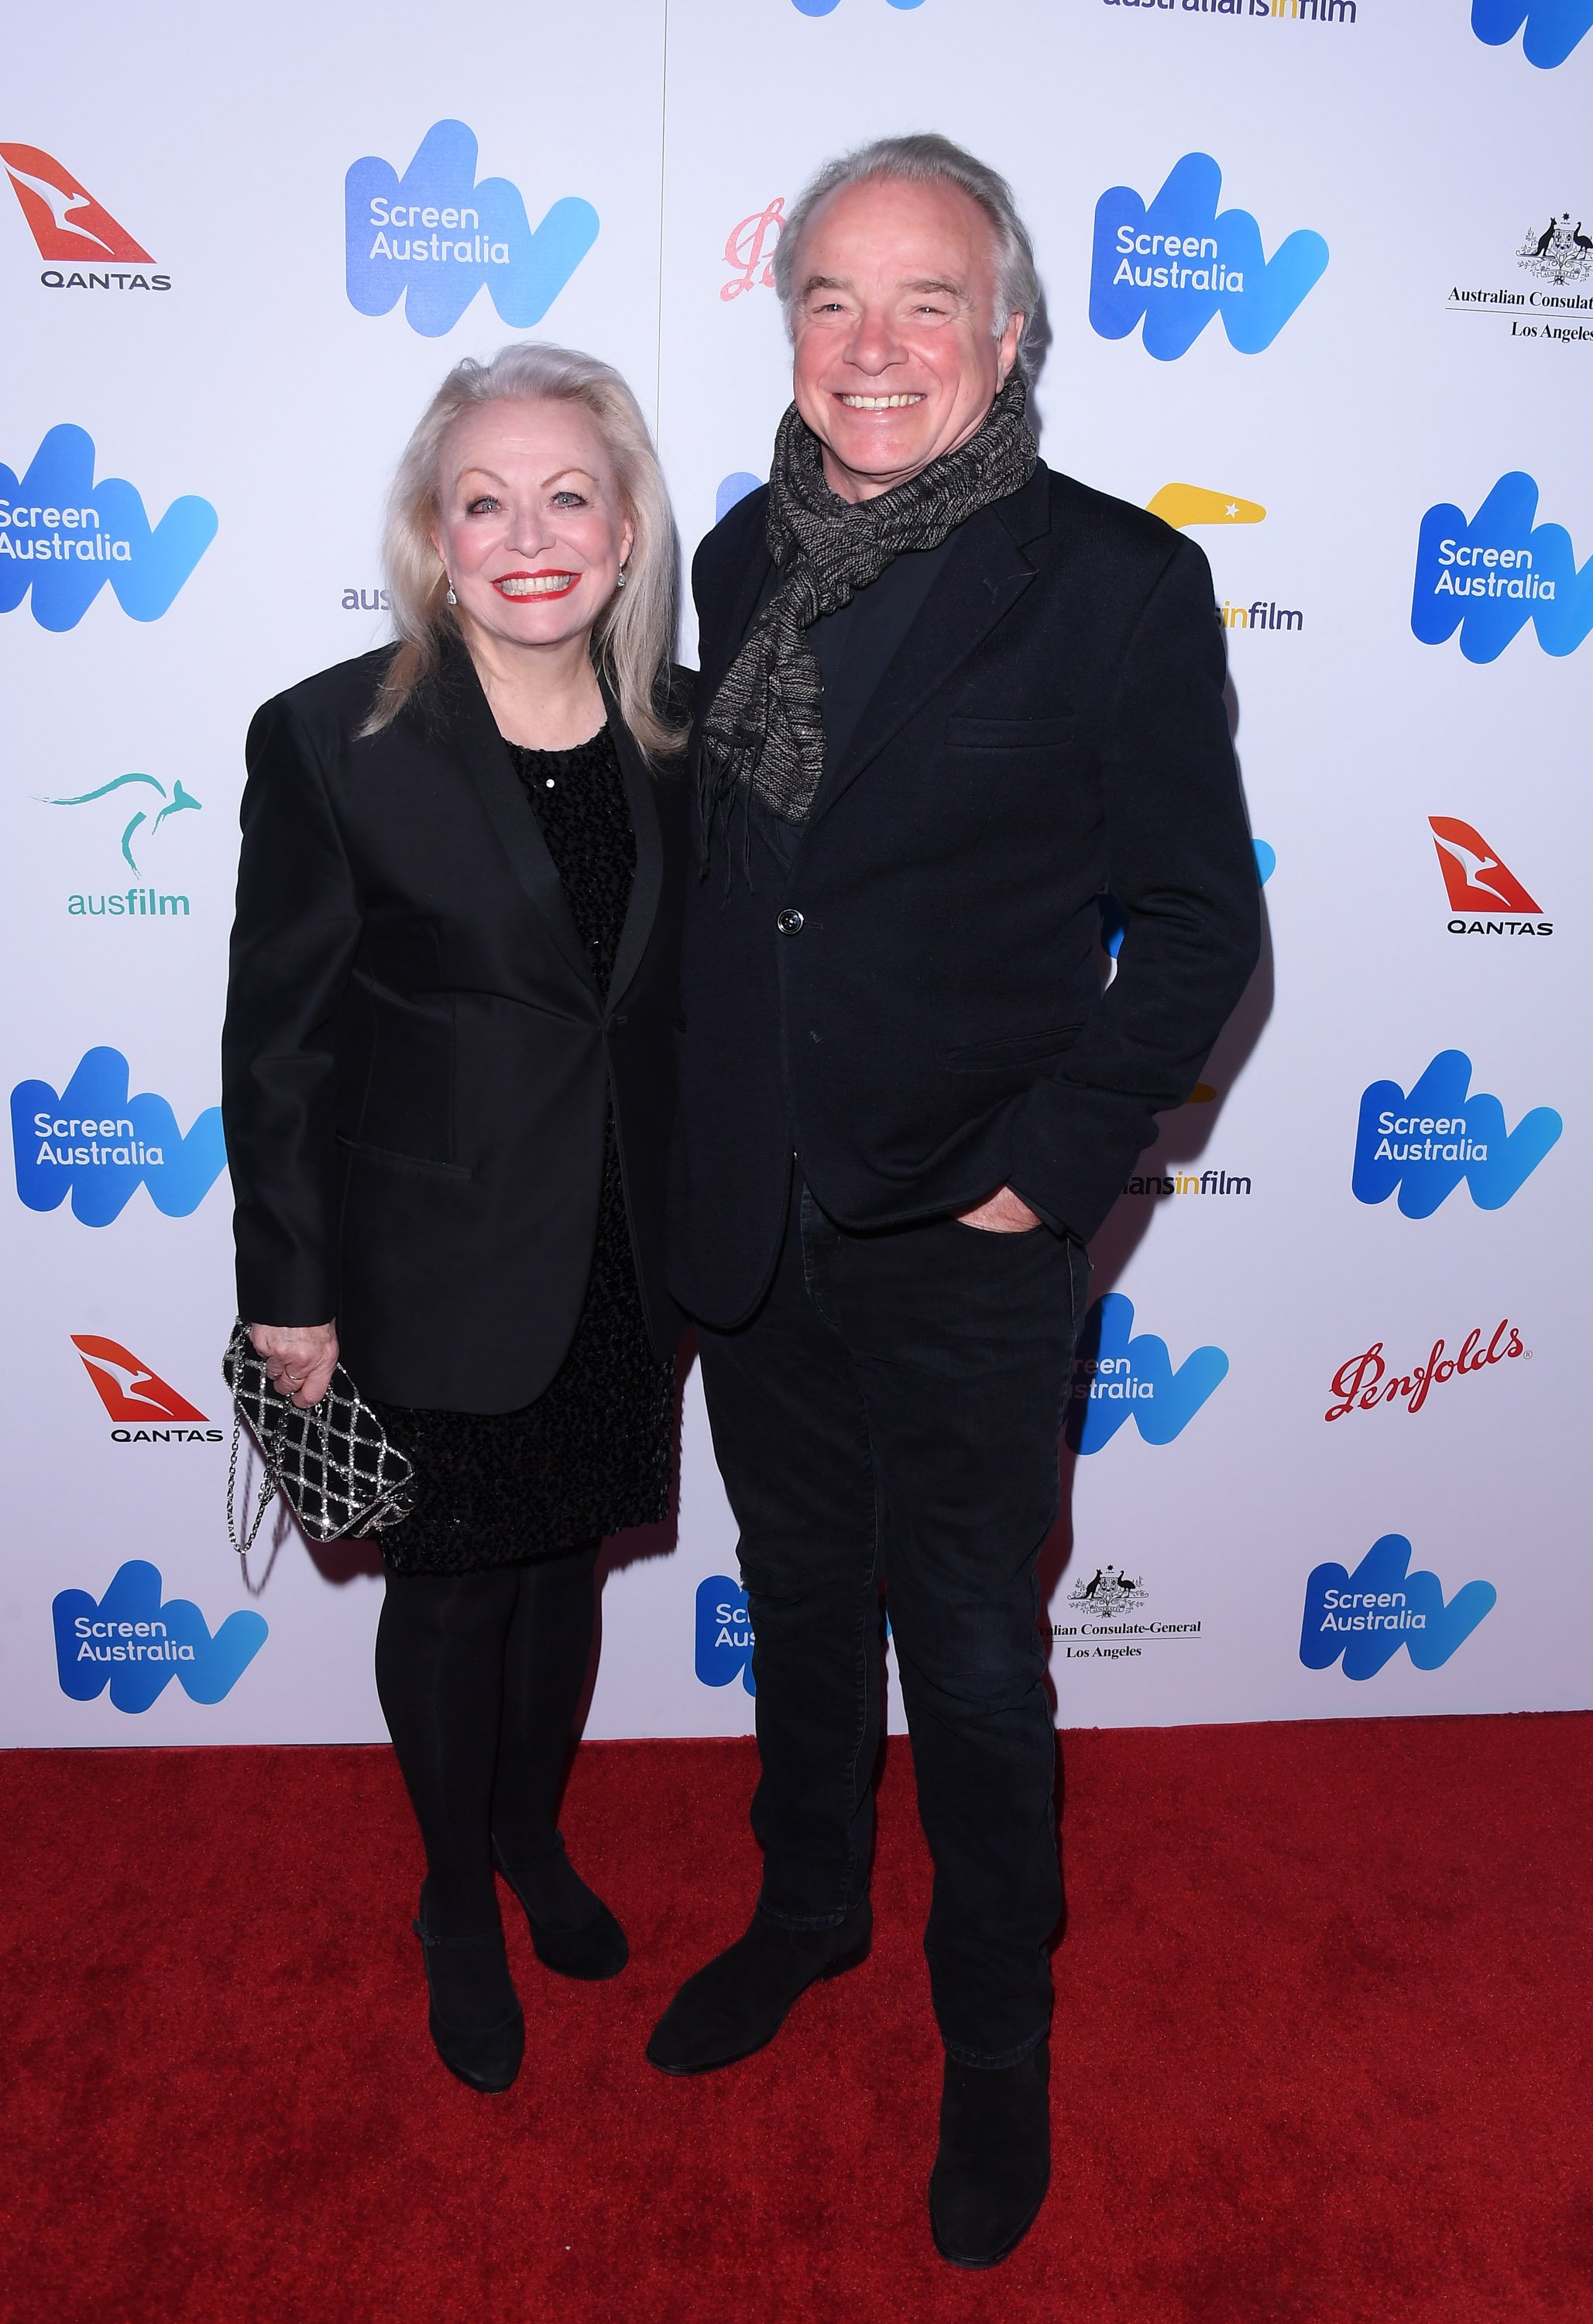 Jacki Weaver and Sean Taylor are photographed at the Australian Oscar Nominees reception on February 24, 2017, in Los Angeles | Source: Getty Images